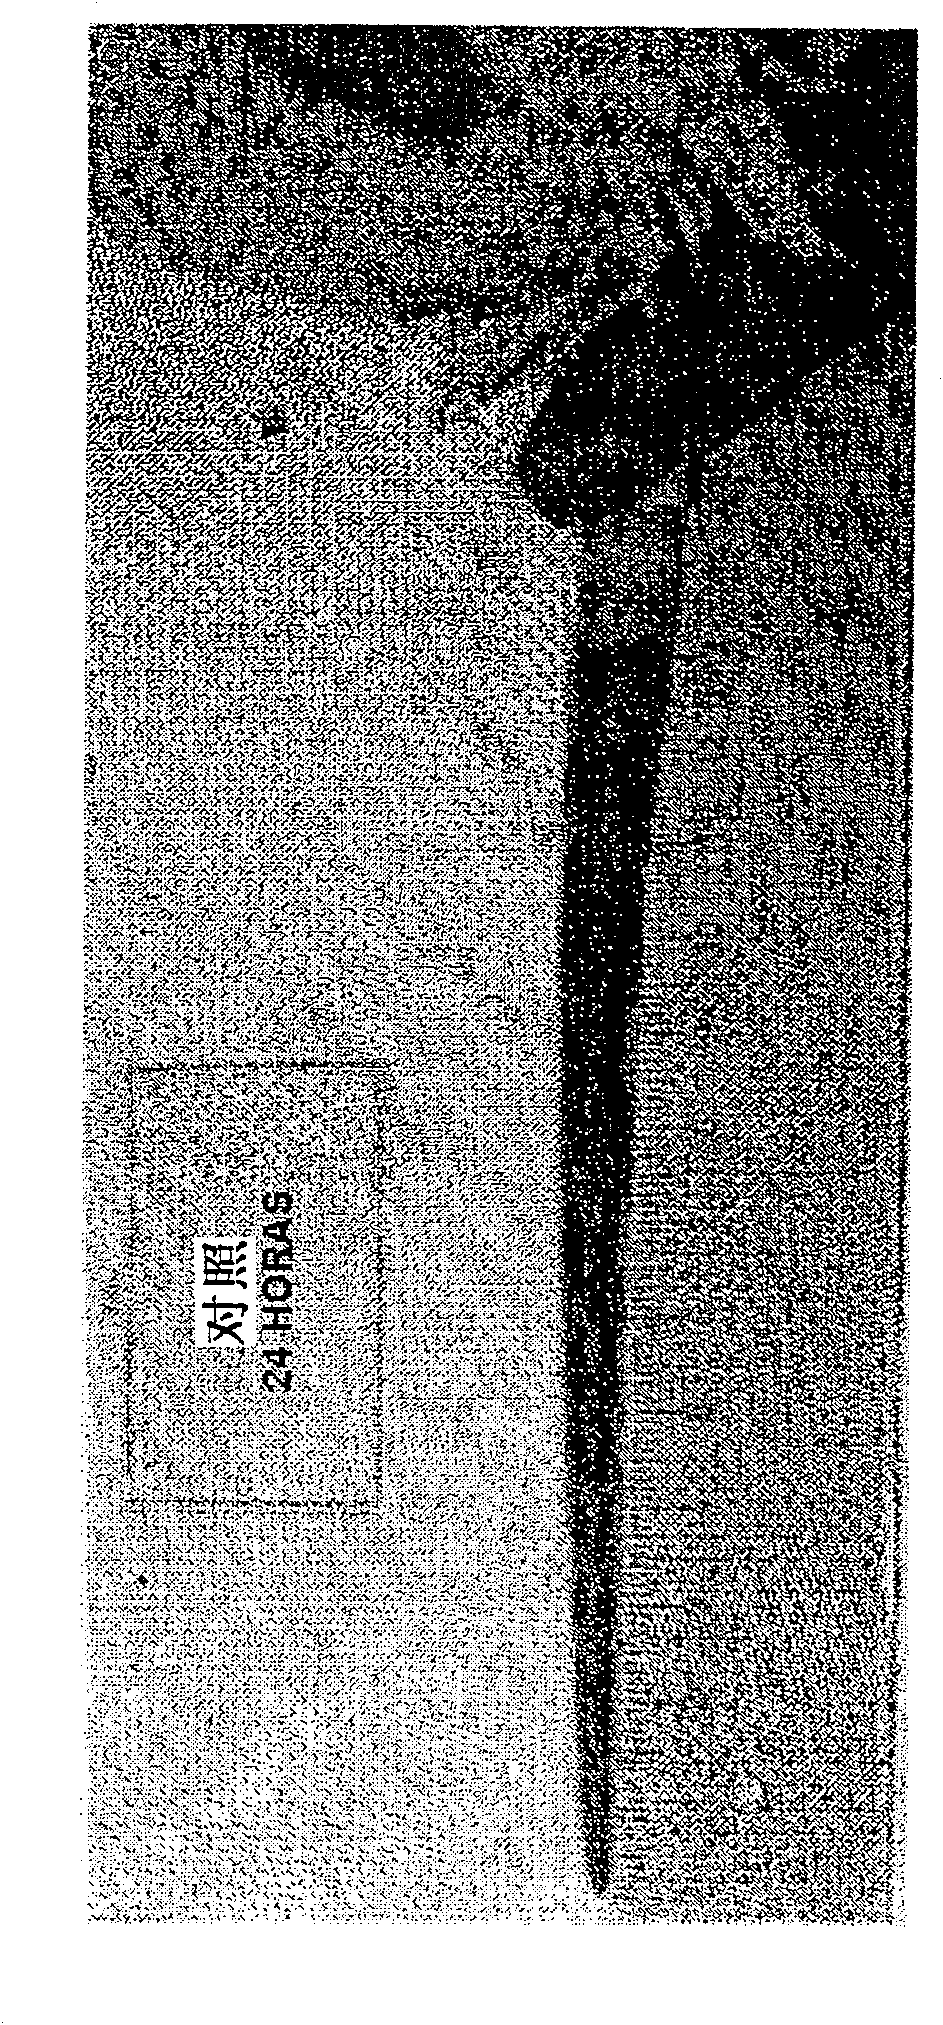 Low molecular weight heparin triethanolamine salt usable as local delivery antithrombotic treating agent, preparing process and use thereof